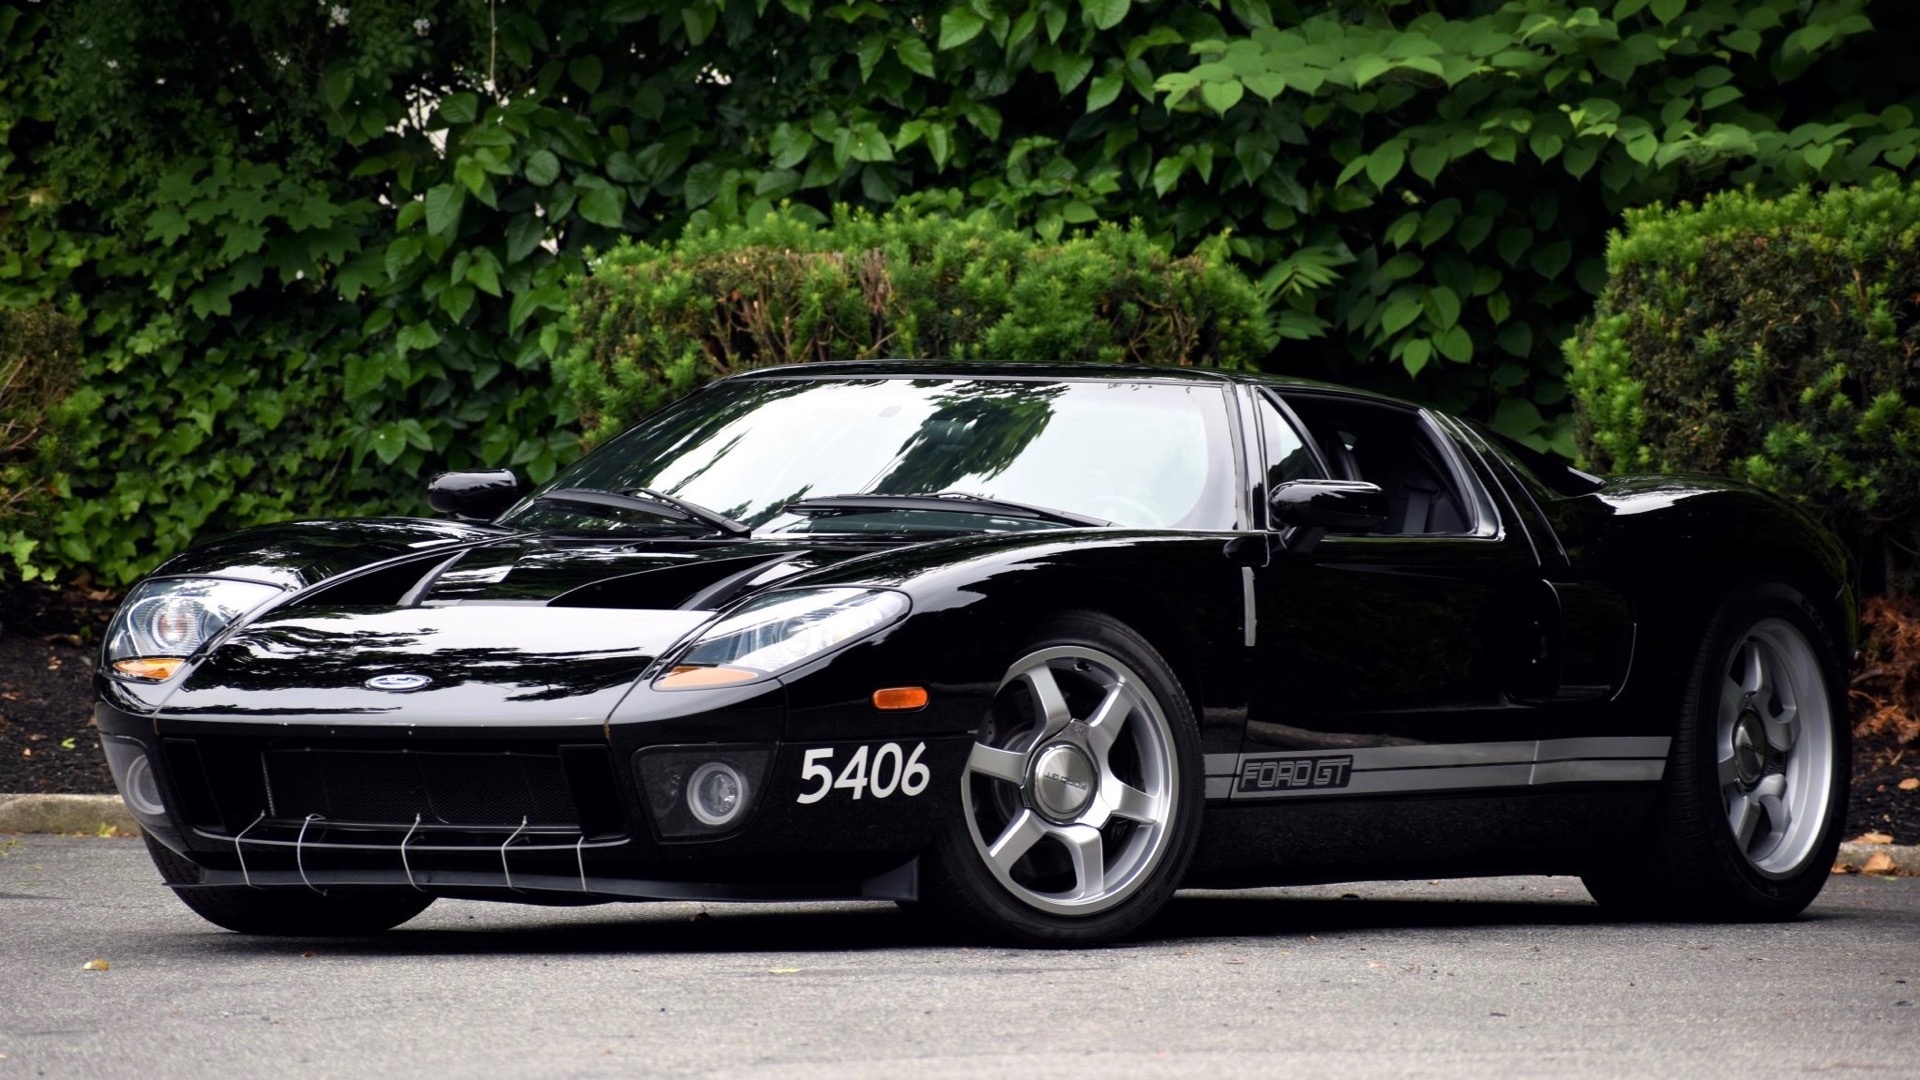 2004 Ford GT Affirmation Prototype 1 on the market on Carry A Trailer Auto Recent